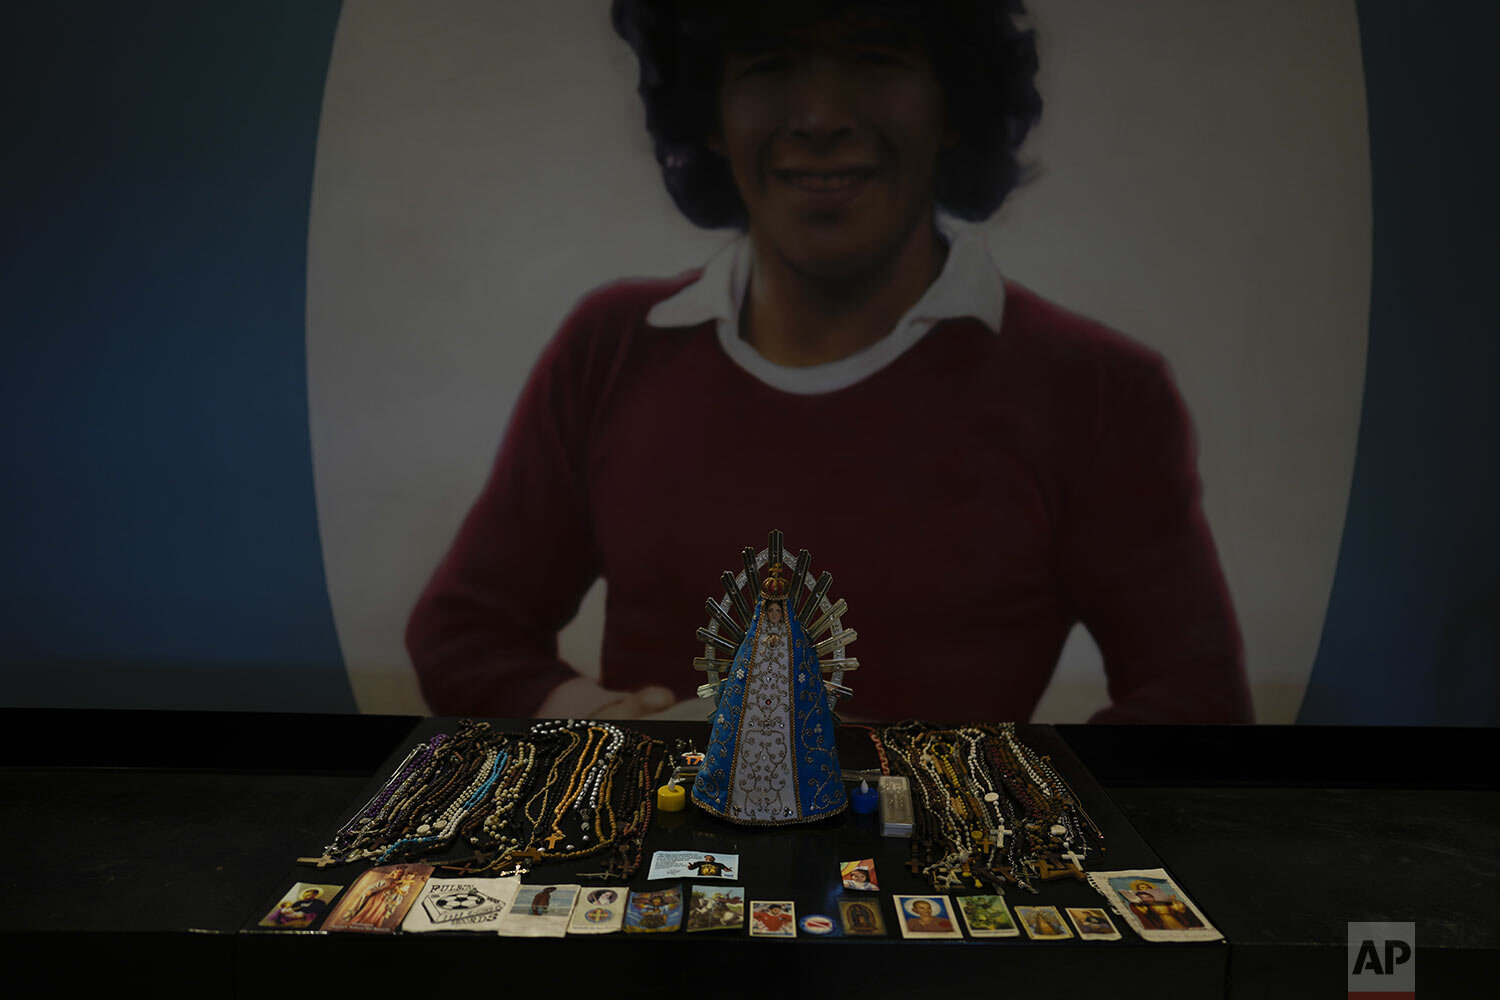  Religious cards and a Virgin Mary statue sit in front of a painting of soccer legend Diego Maradona inside a chapel at the Diego Armando Maradona stadium in Buenos Aires, Argentina, Thursday, Aug. 26, 2021. (AP Photo/Natacha Pisarenko) 